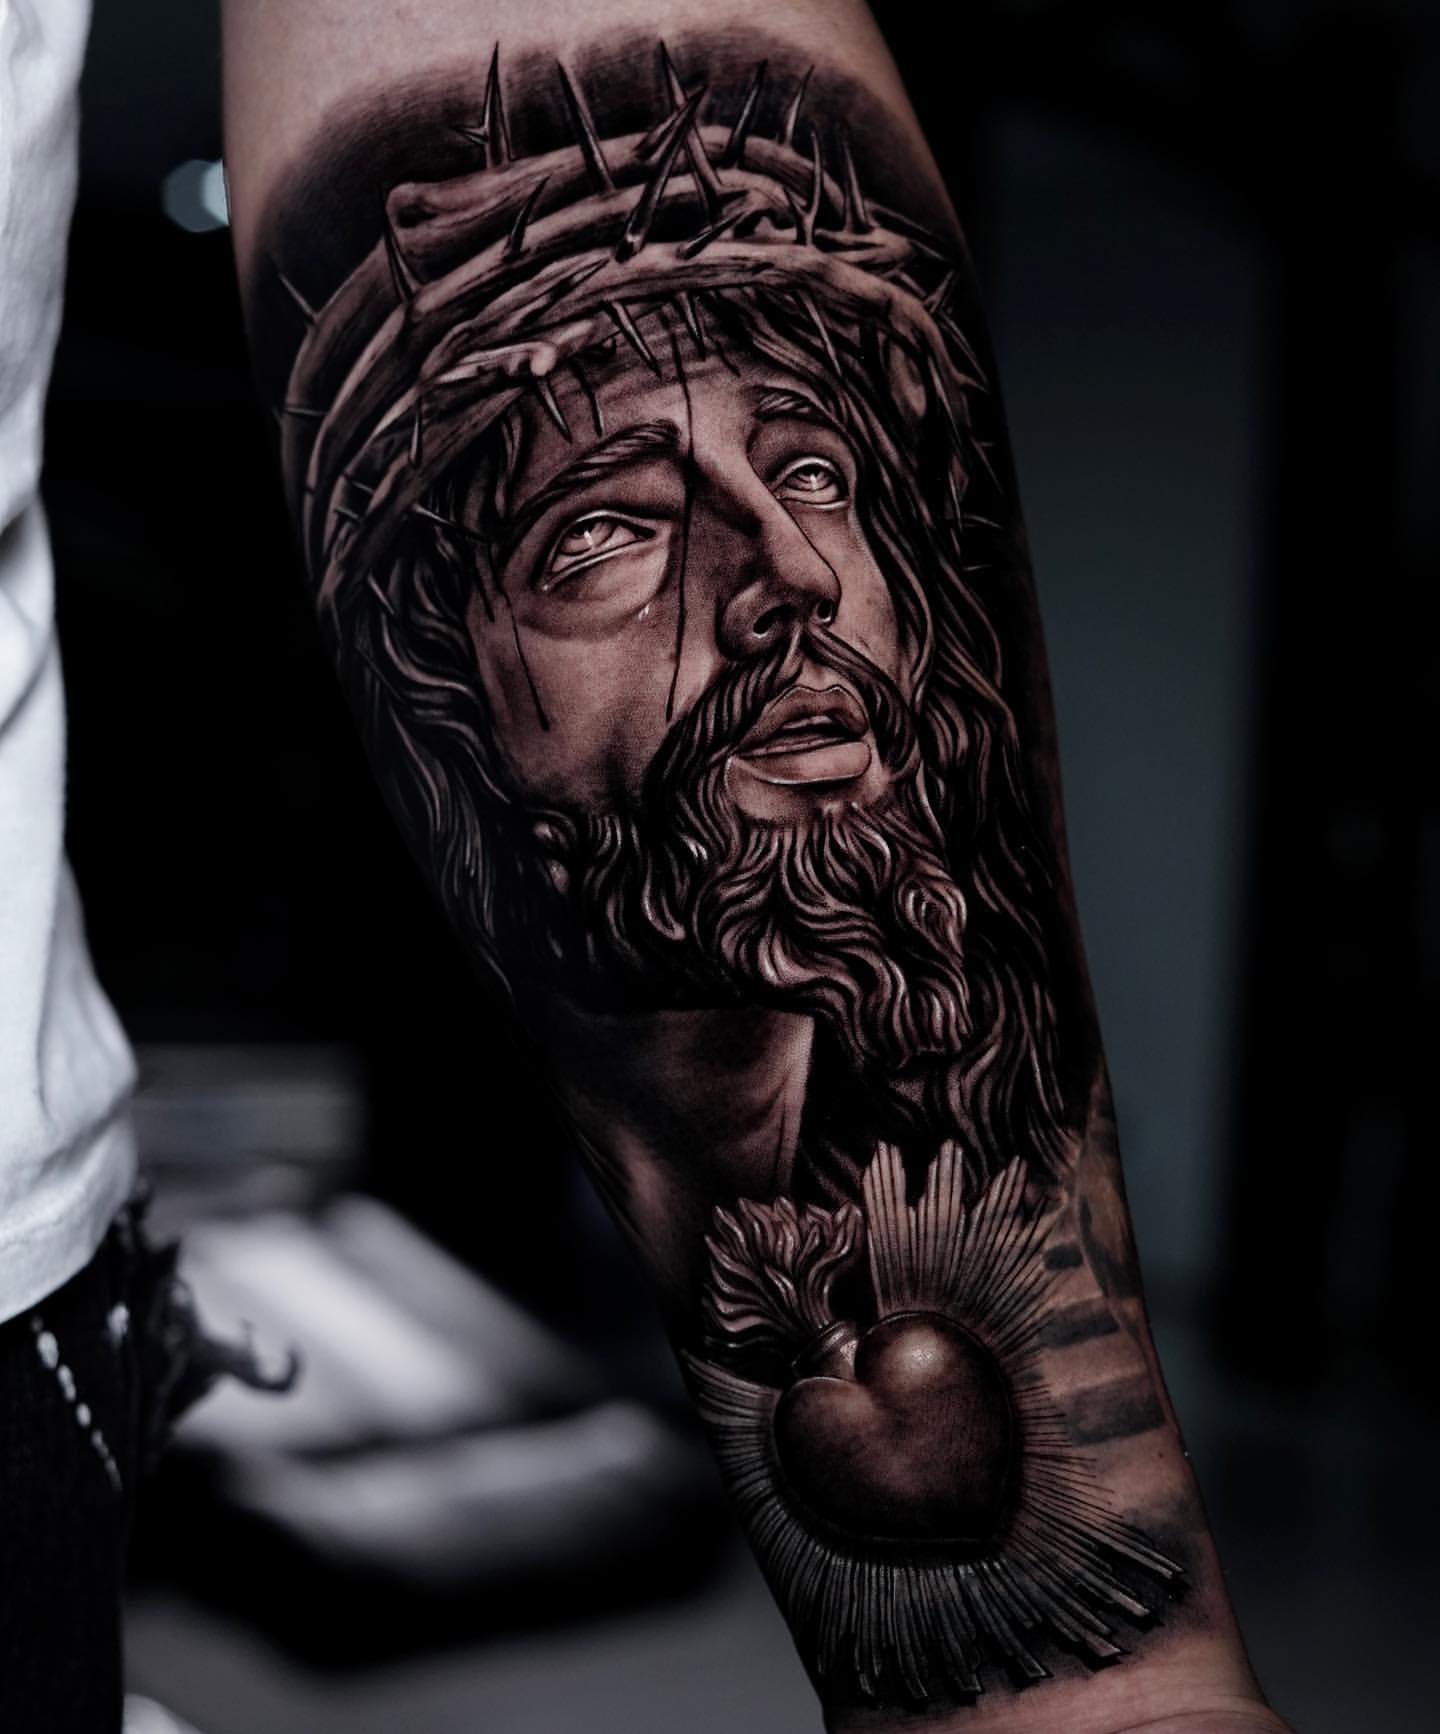 Men's Hairstyles Now | Cool forearm tattoos, Forearm sleeve tattoos, Inner arm  tattoos